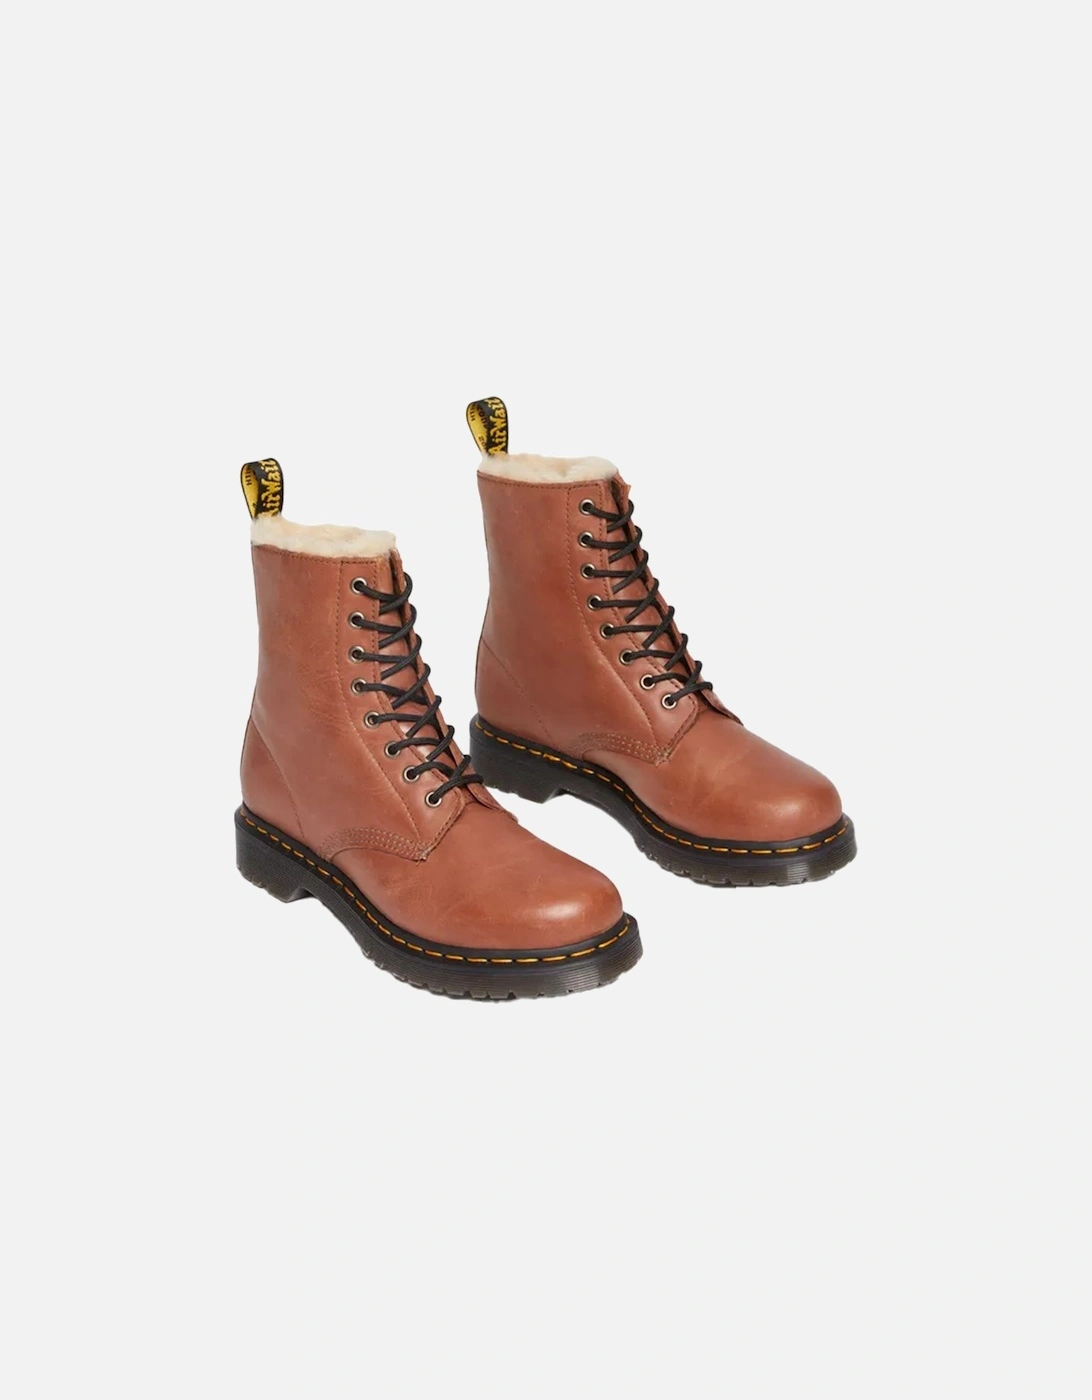 Dr. Martens Womens Serena Saddle Farrier Boots (Tan)